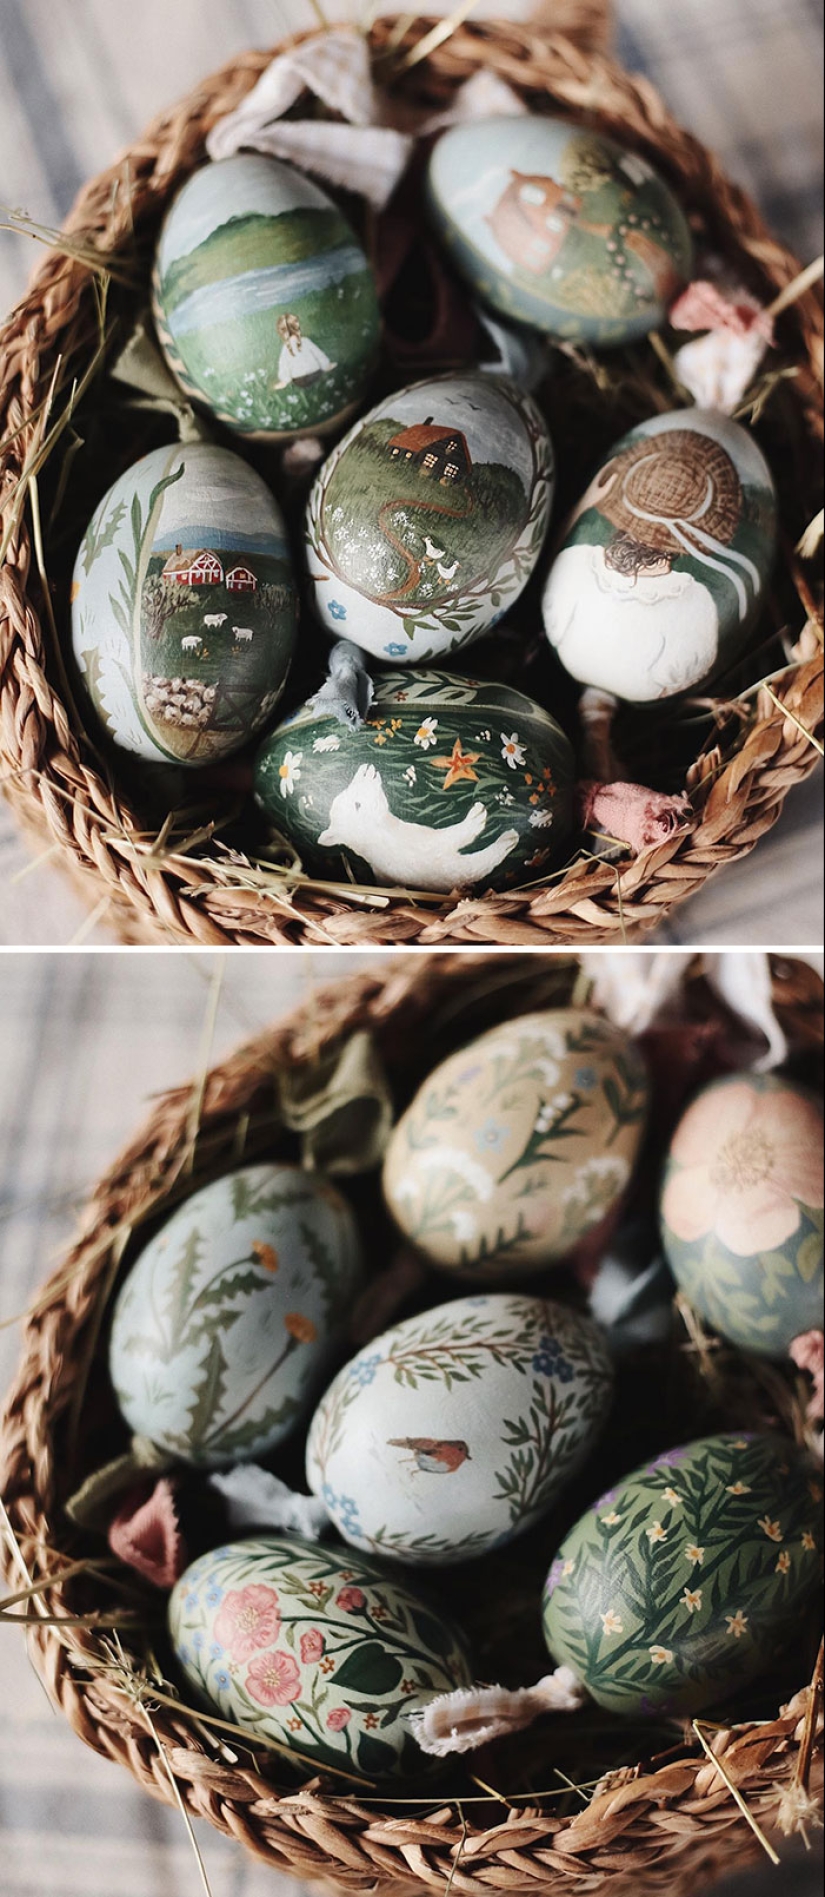 10 Times People Took Egg Decoration For Easter Very Seriously And Shared Their Best Results